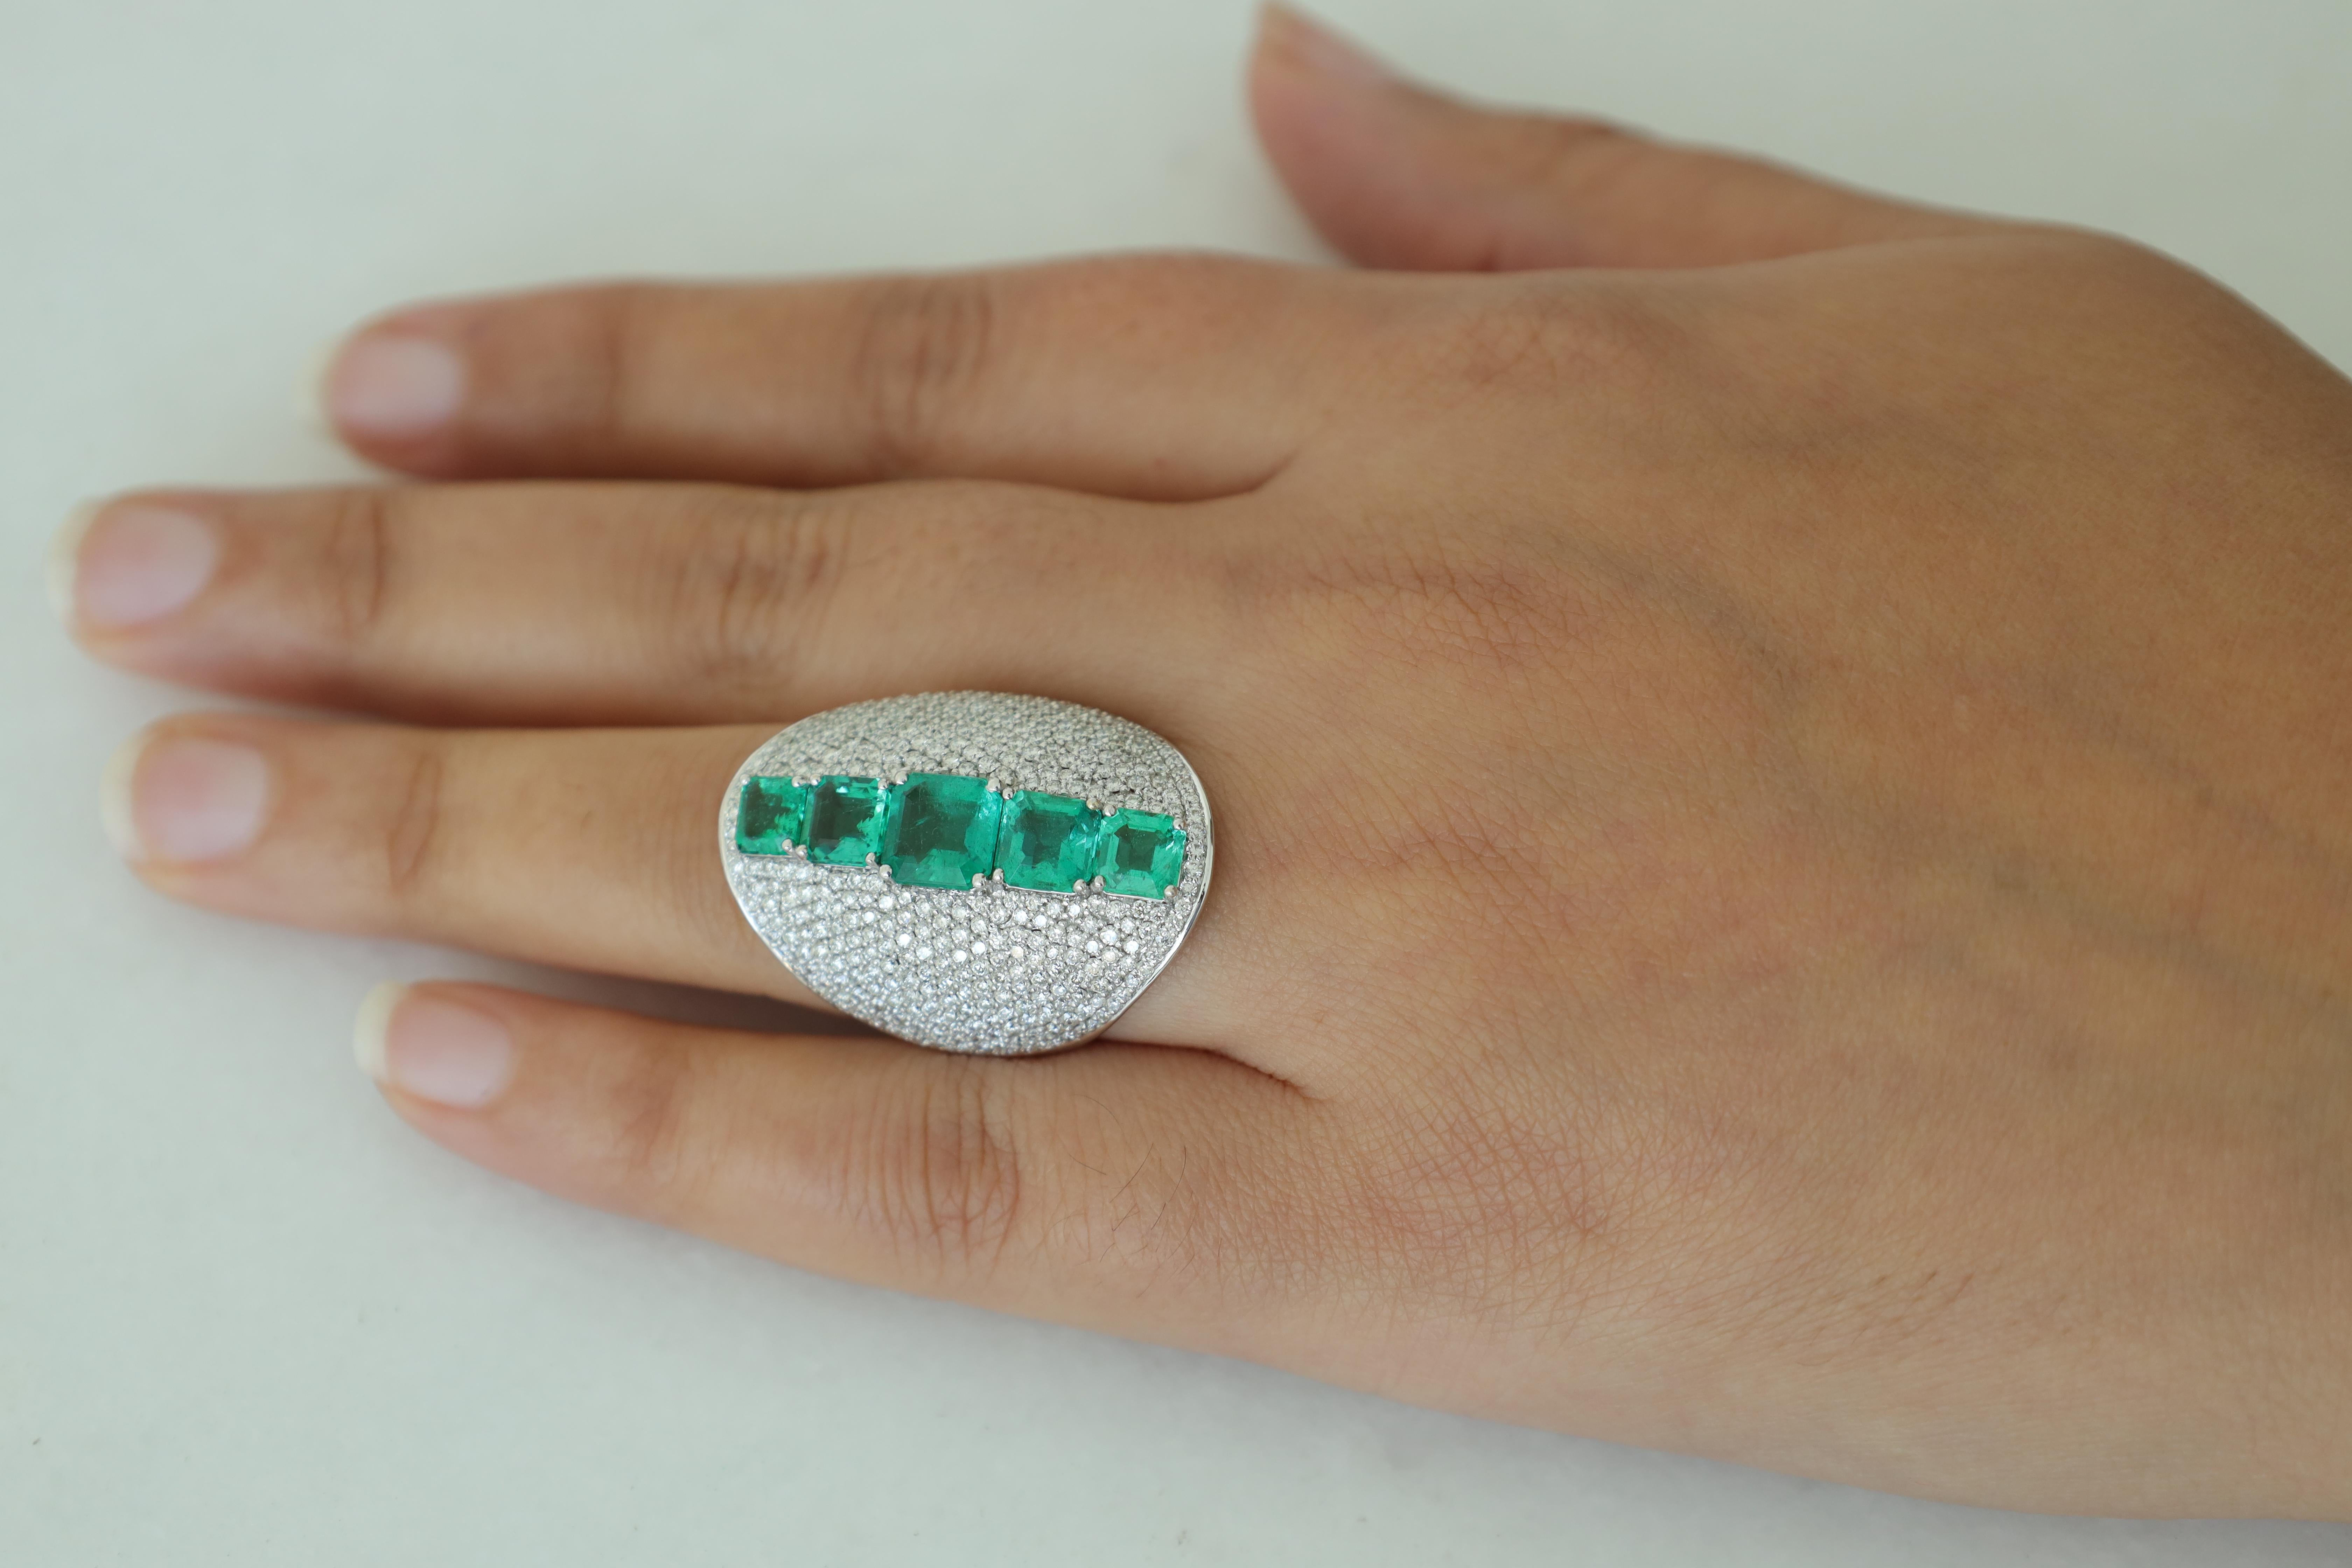 4.06 Carat Emerald & Diamond Cocktail Ring Set in White Gold In New Condition For Sale In Jaipur, Rajasthan